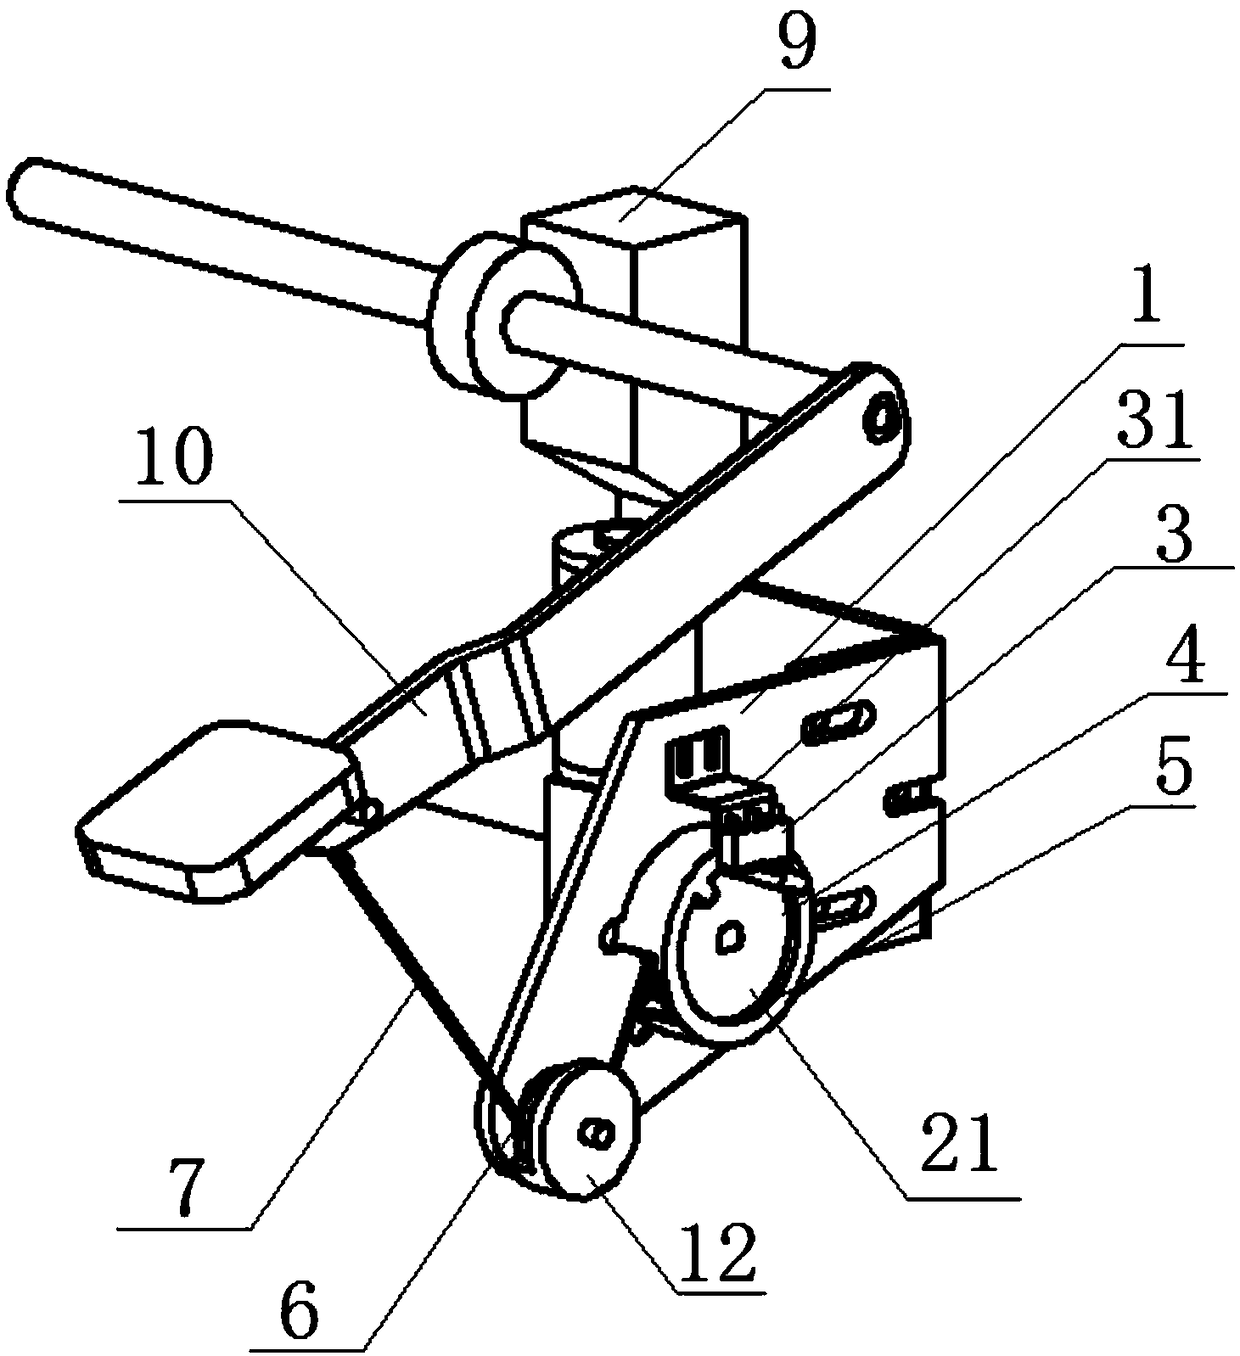 Auxiliary brake device and system